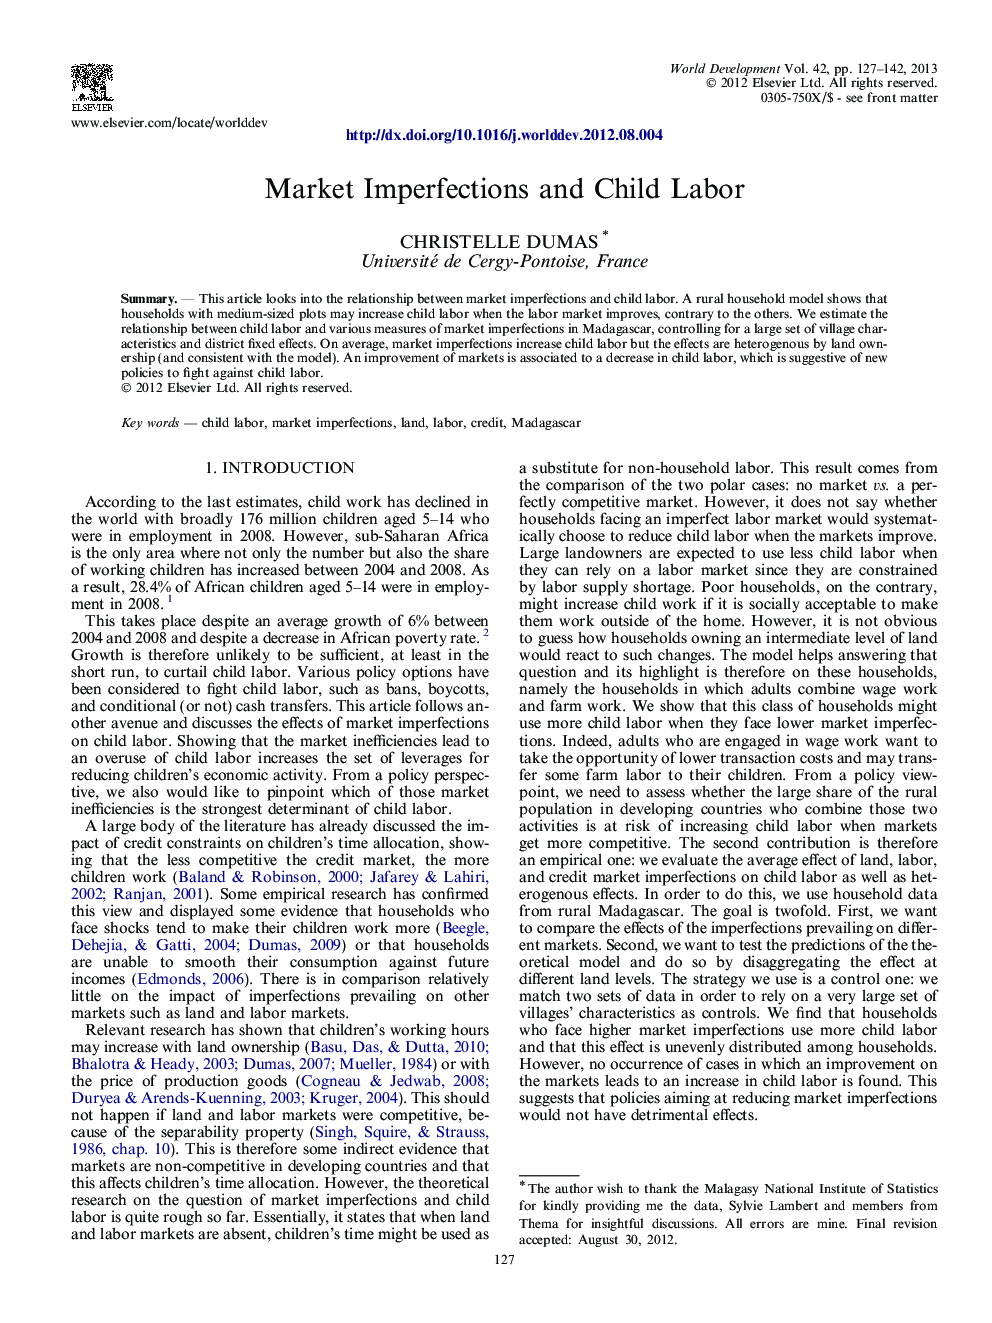 Market Imperfections and Child Labor